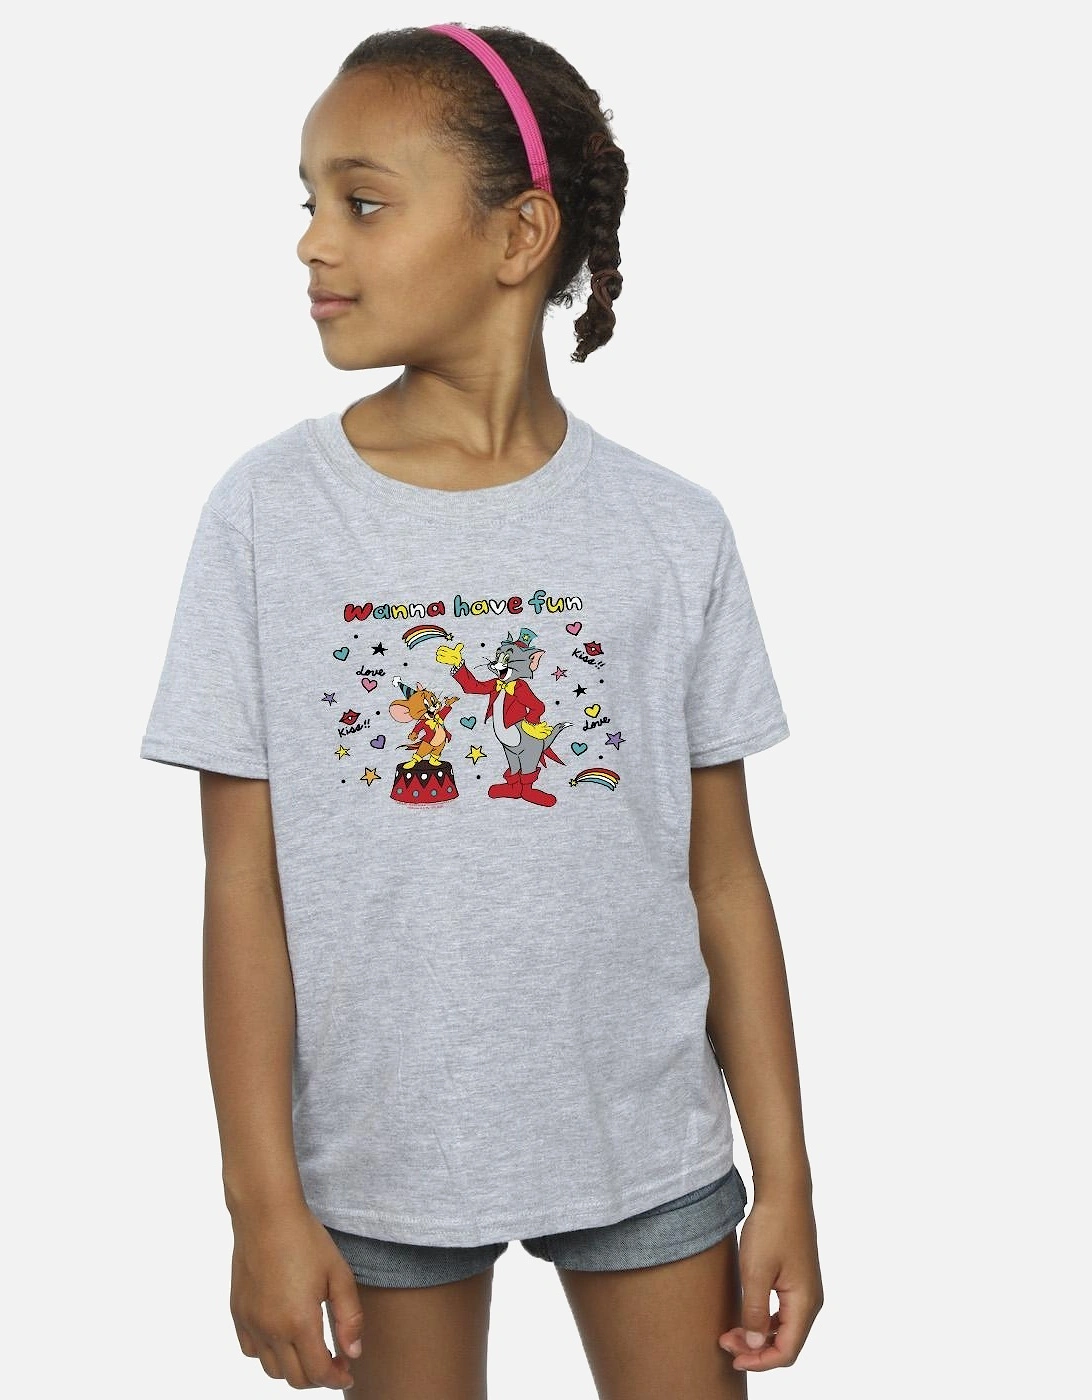 Tom And Jerry Girls Wanna Have Fun Cotton T-Shirt